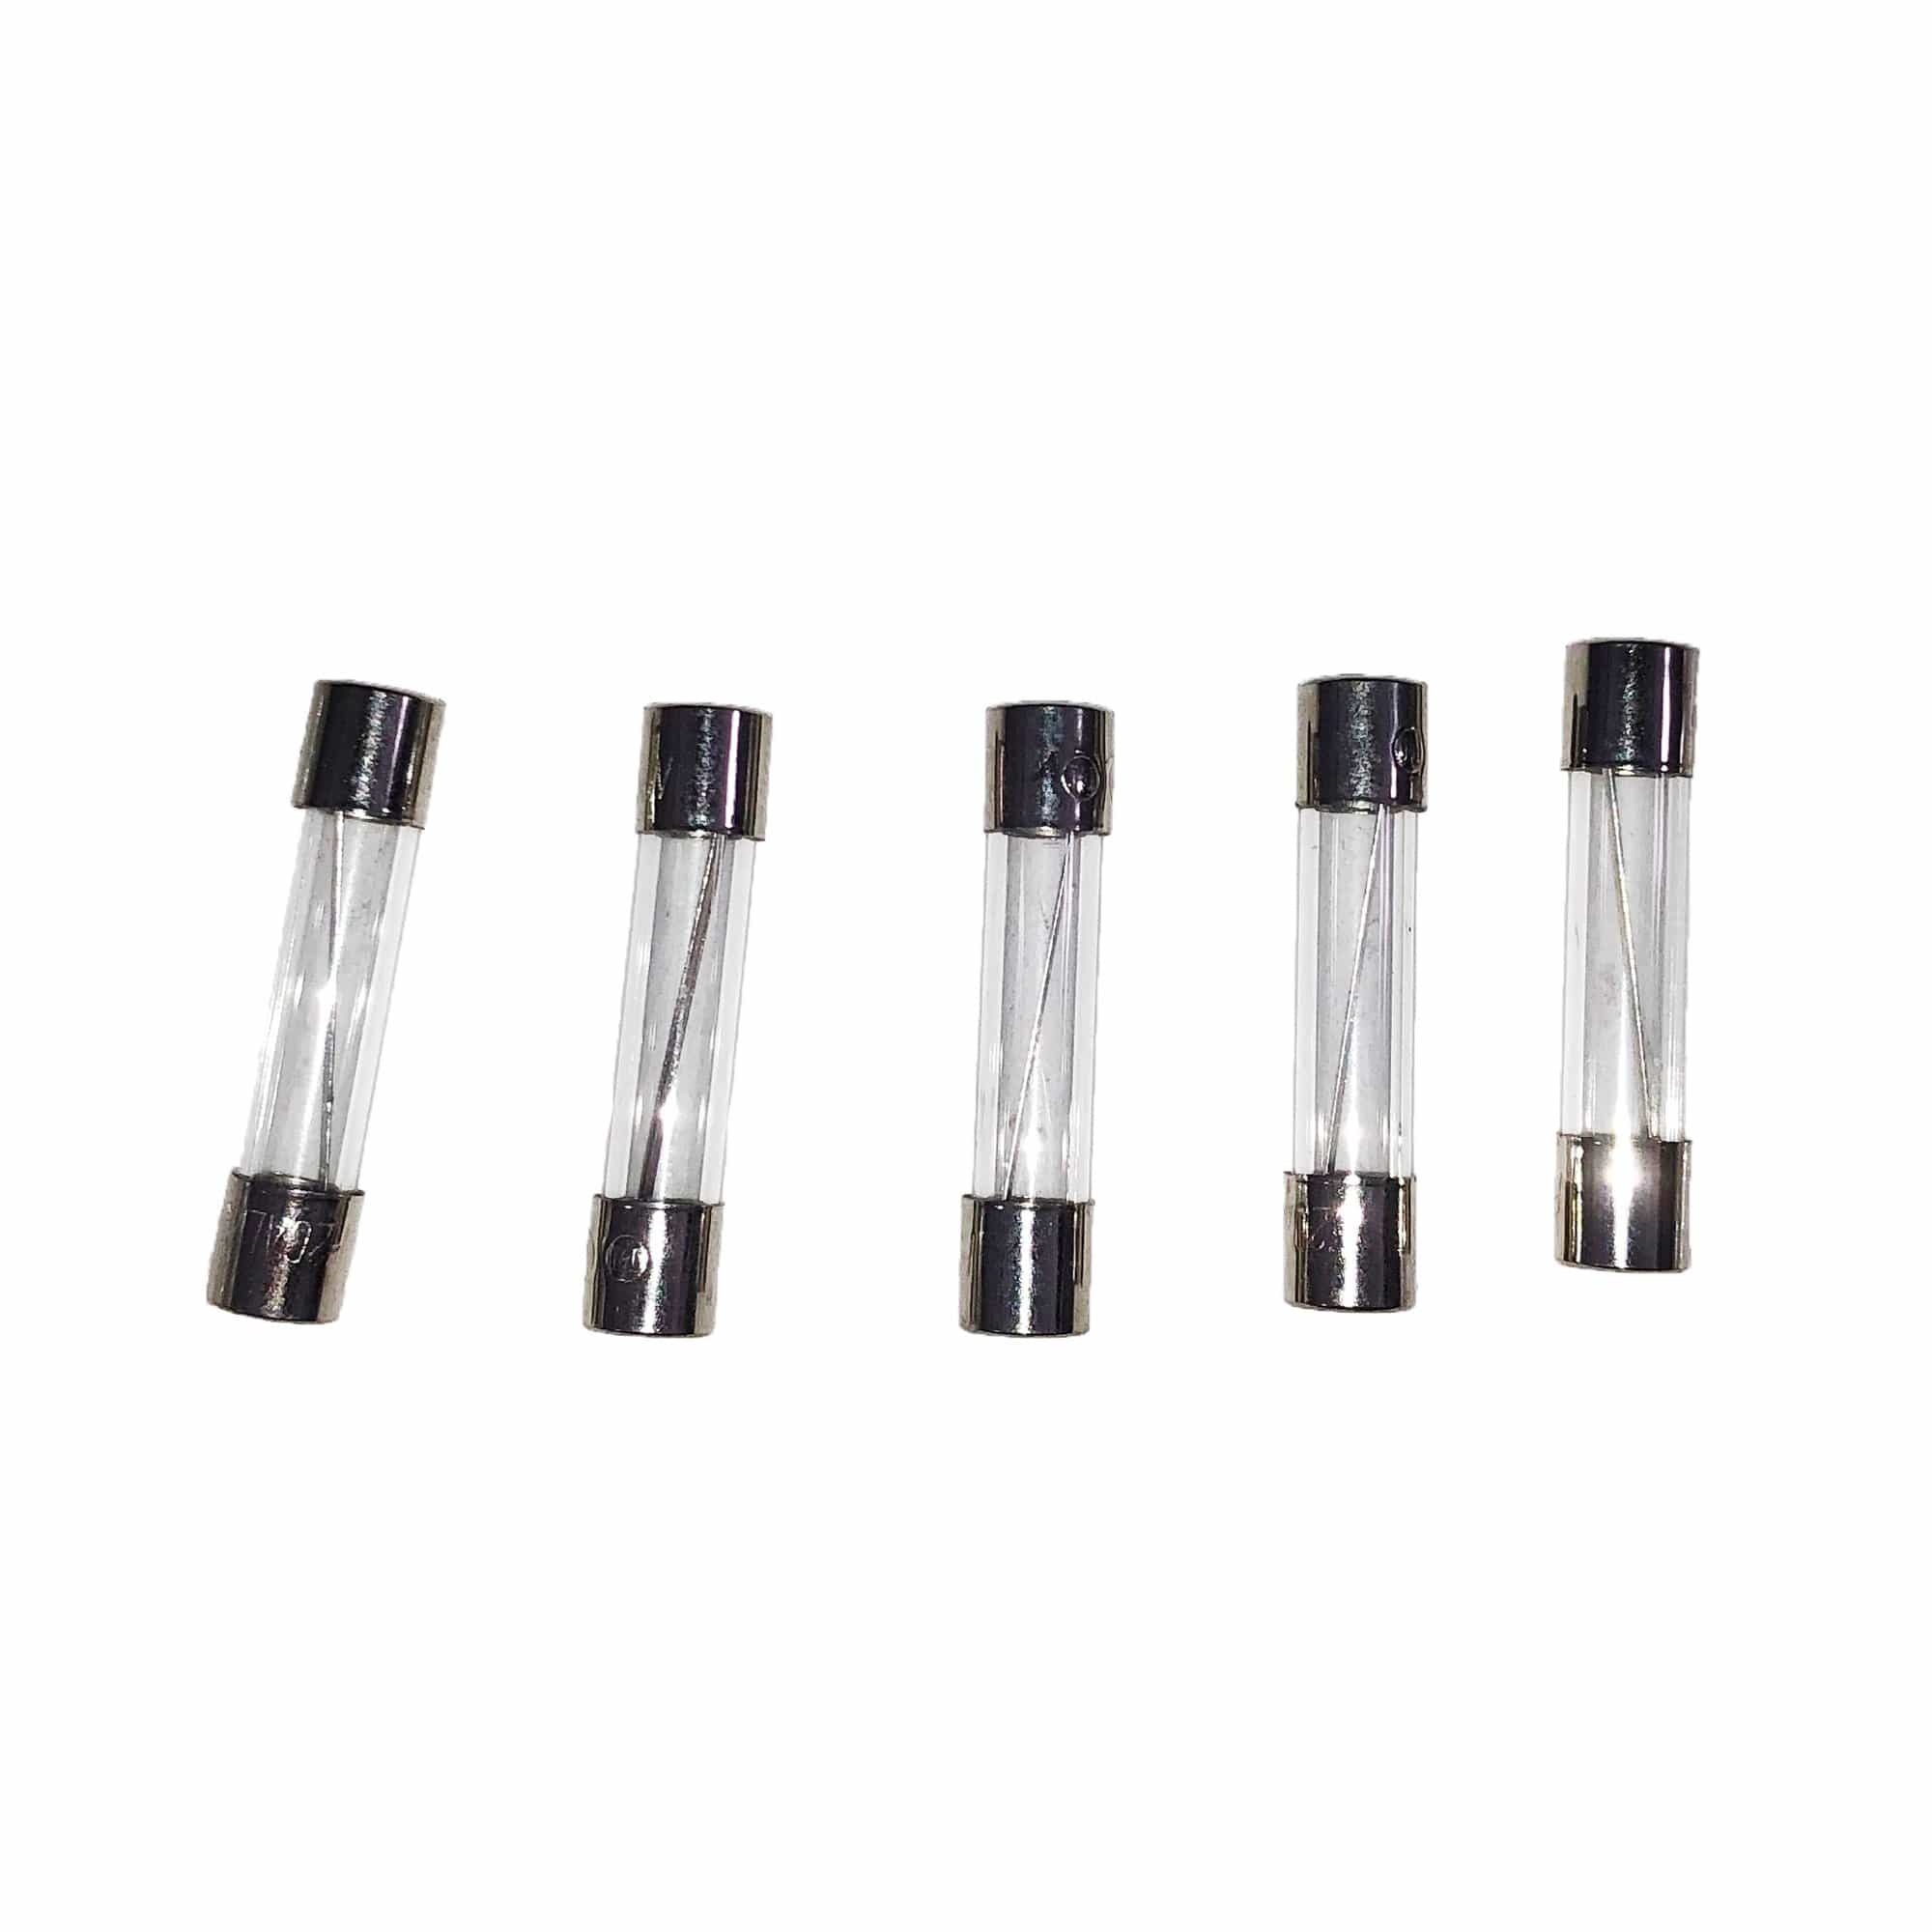 PowerBright F2A 2 Amp Glass Fuse 5 Pack